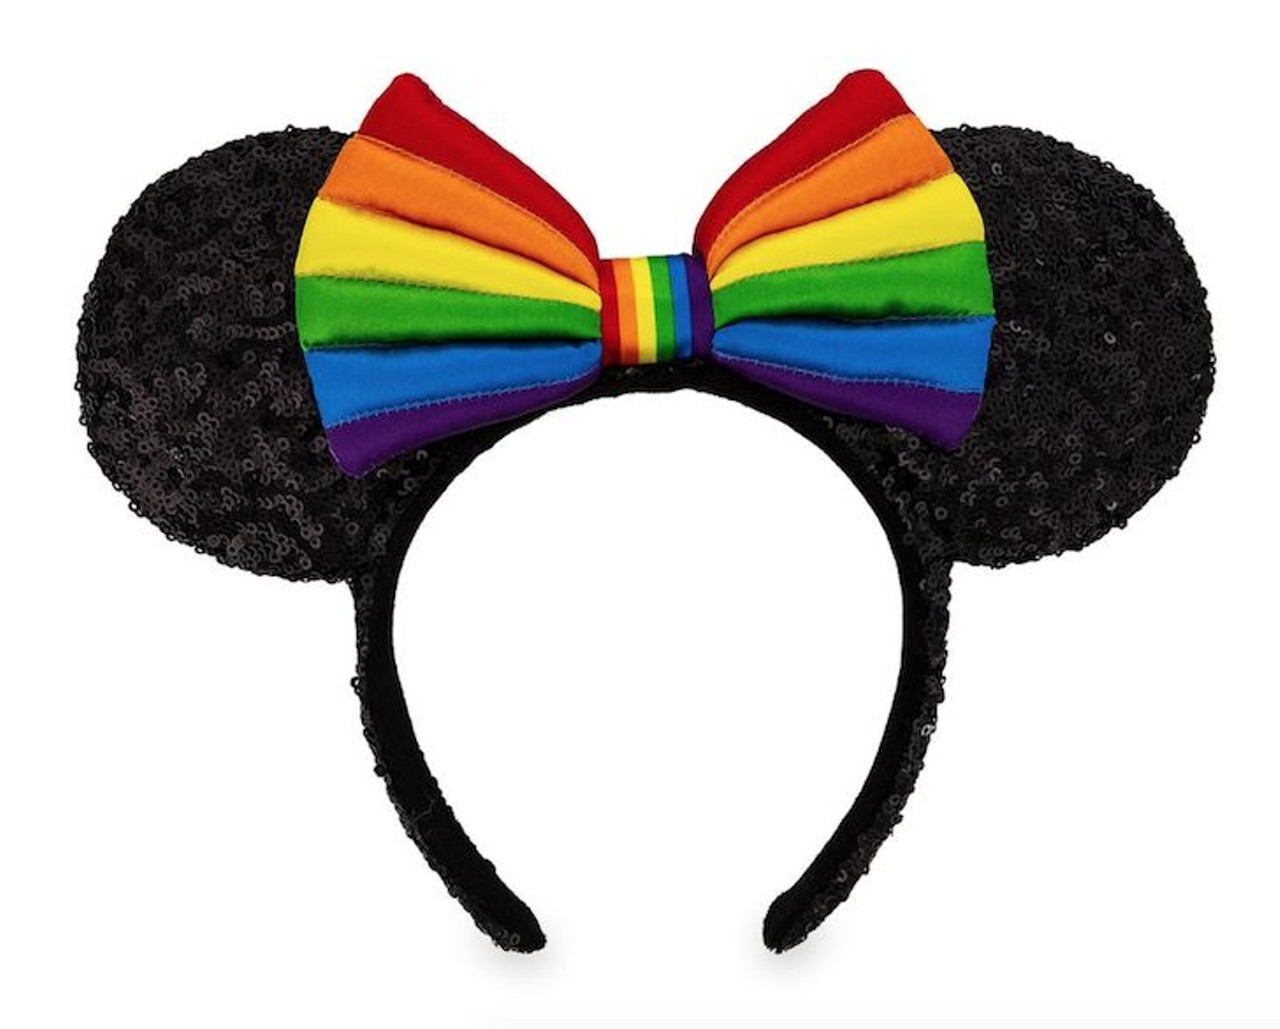 Minnie Mouse Ear Headband
Padded ears covered in black sequins come complete with a padded rainbow satin bow, for $27.99.
Photo via shopDisney